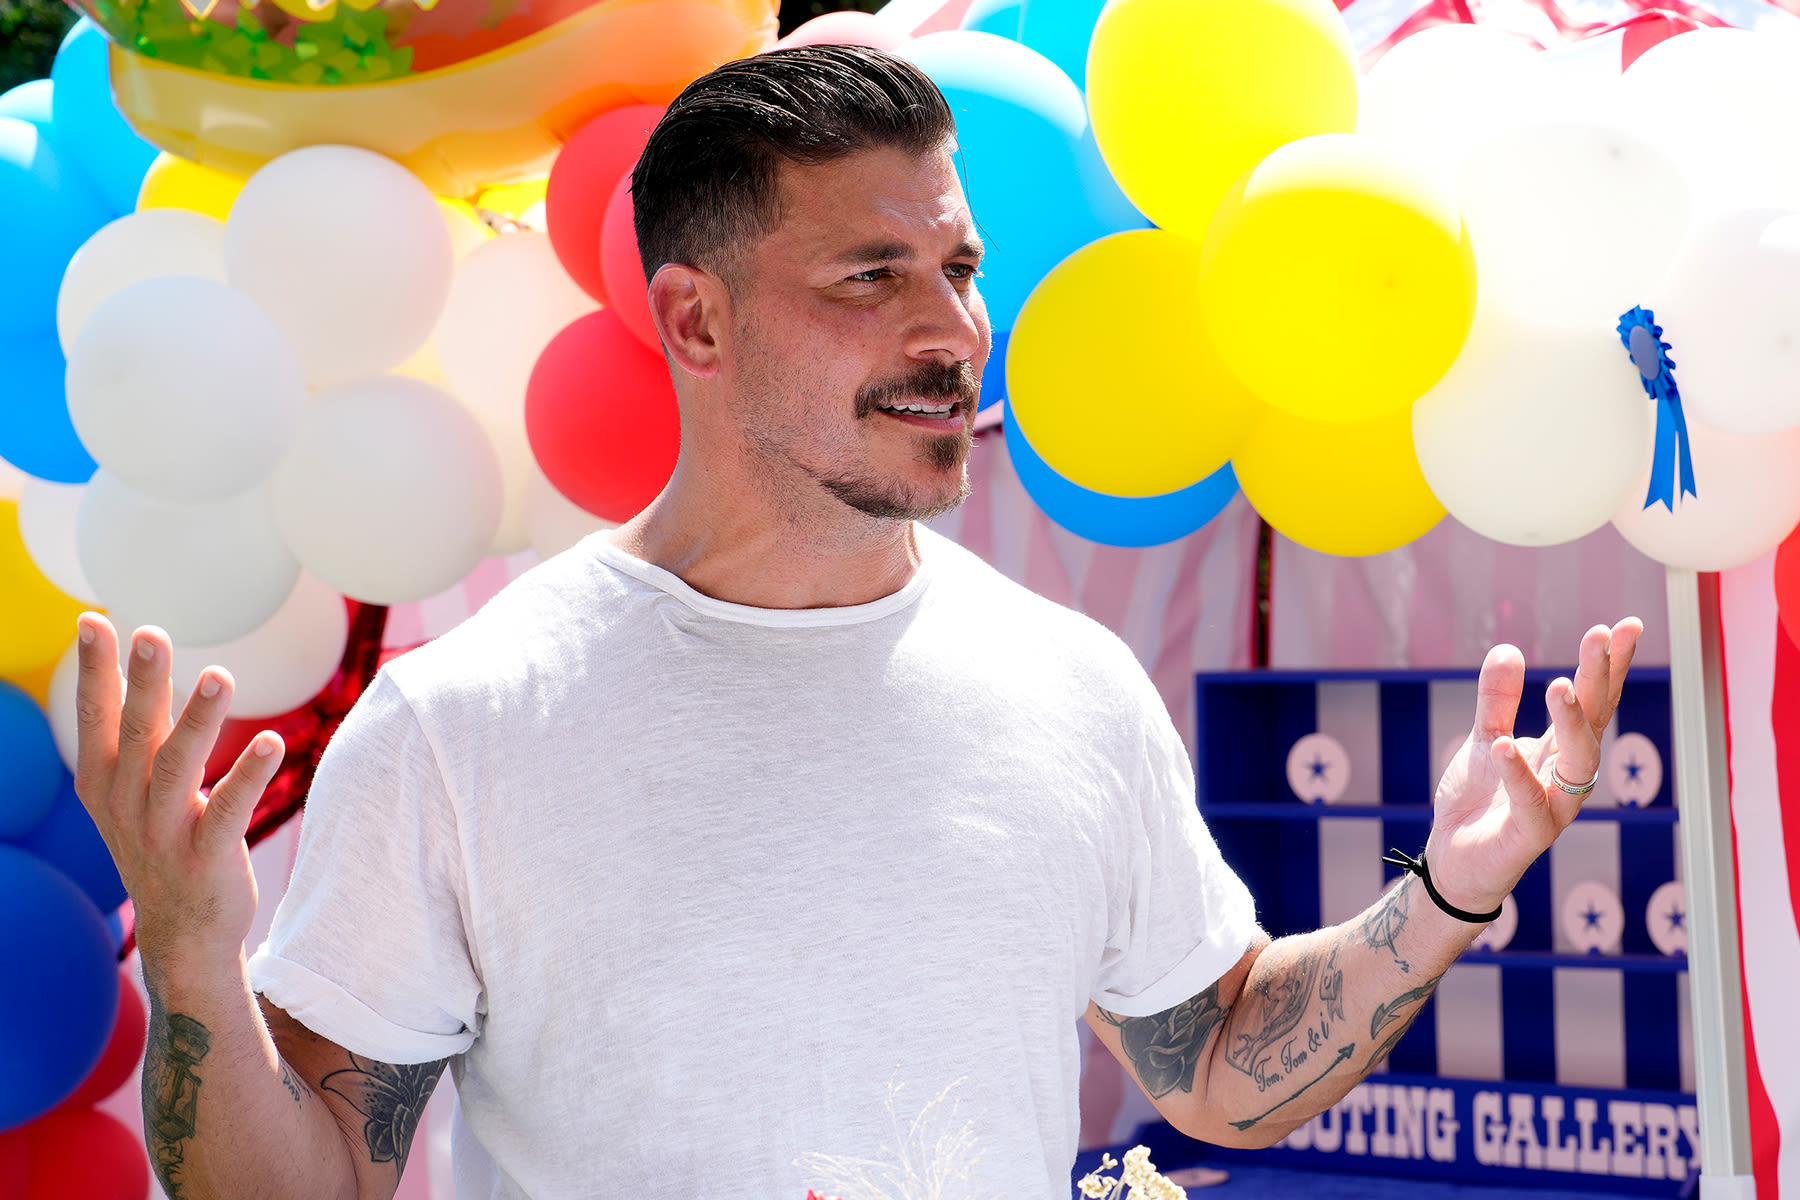 Jax Taylor Can’t Help But Be the Worst — And That’s Why ‘The Valley’ Is So Good